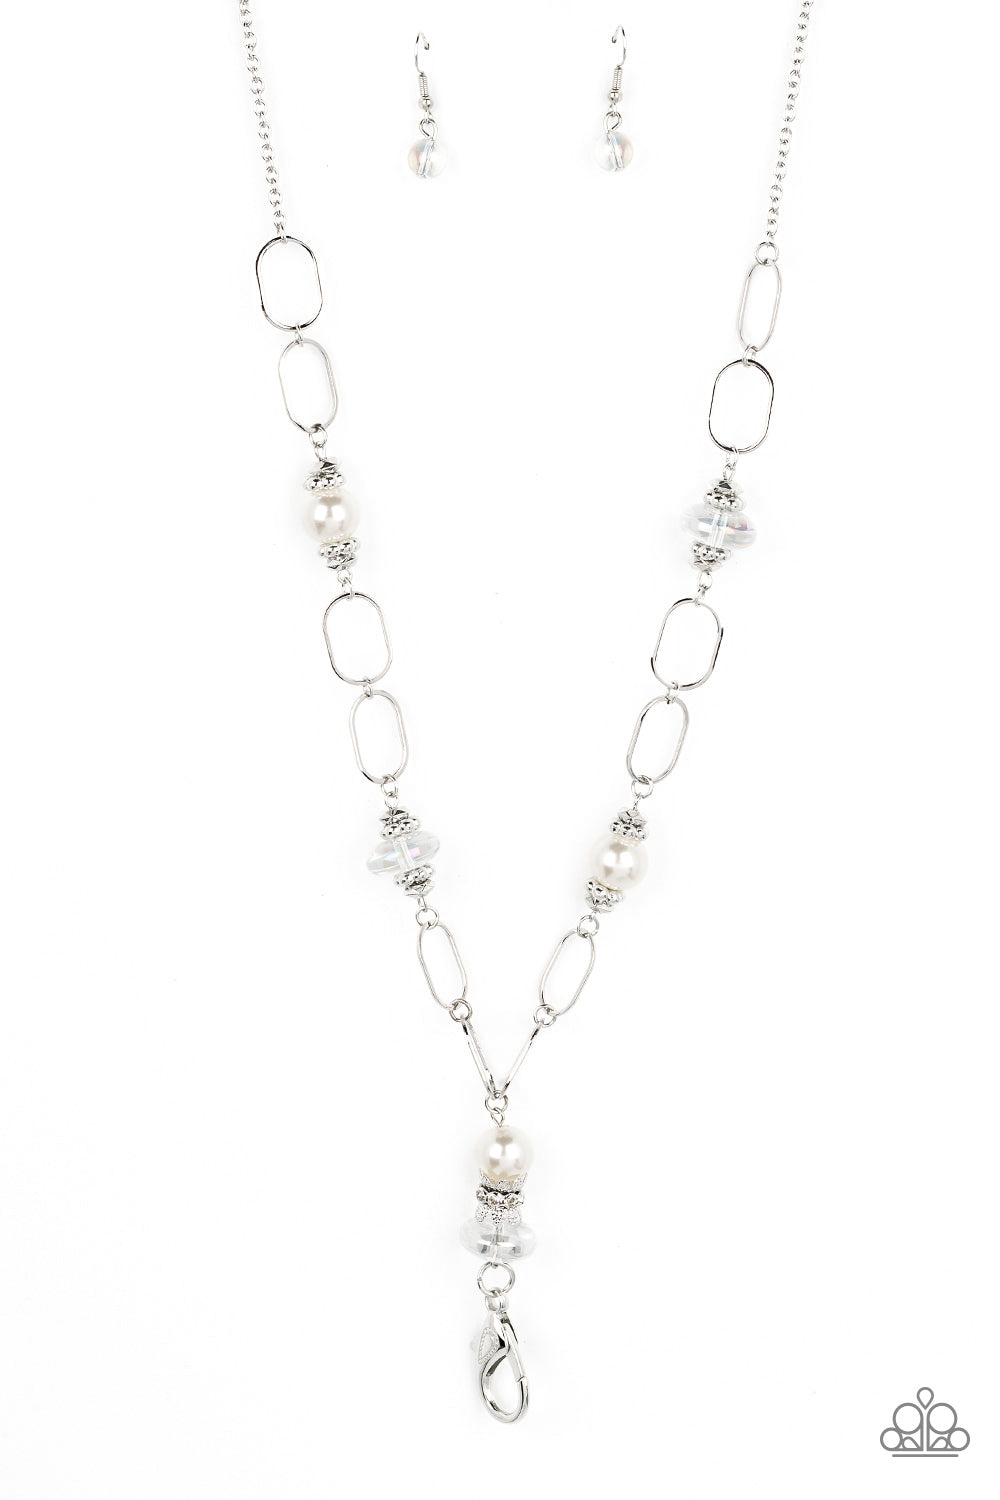 Creative Couture - White Pearls, Iridescent Beads, & Silver Accent Paparazzi LANYARD Necklace & matching earrings